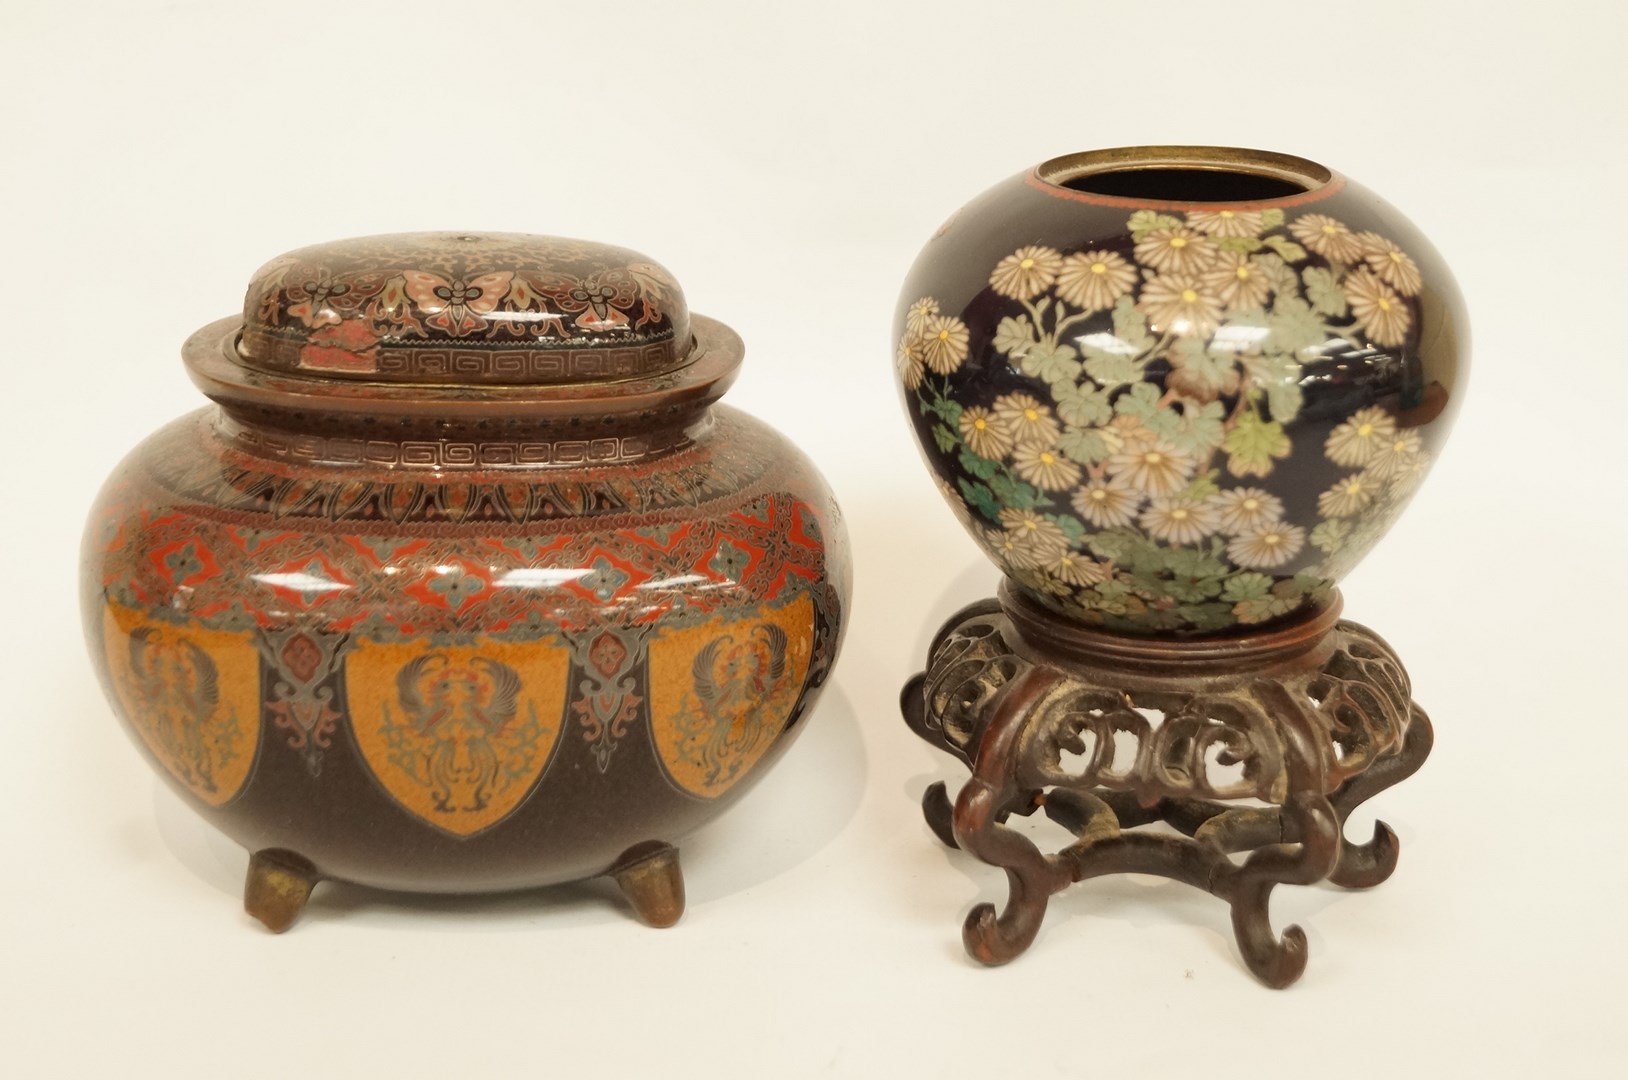 A Japanese cloisonne vase and cover, the interior with removable cover,